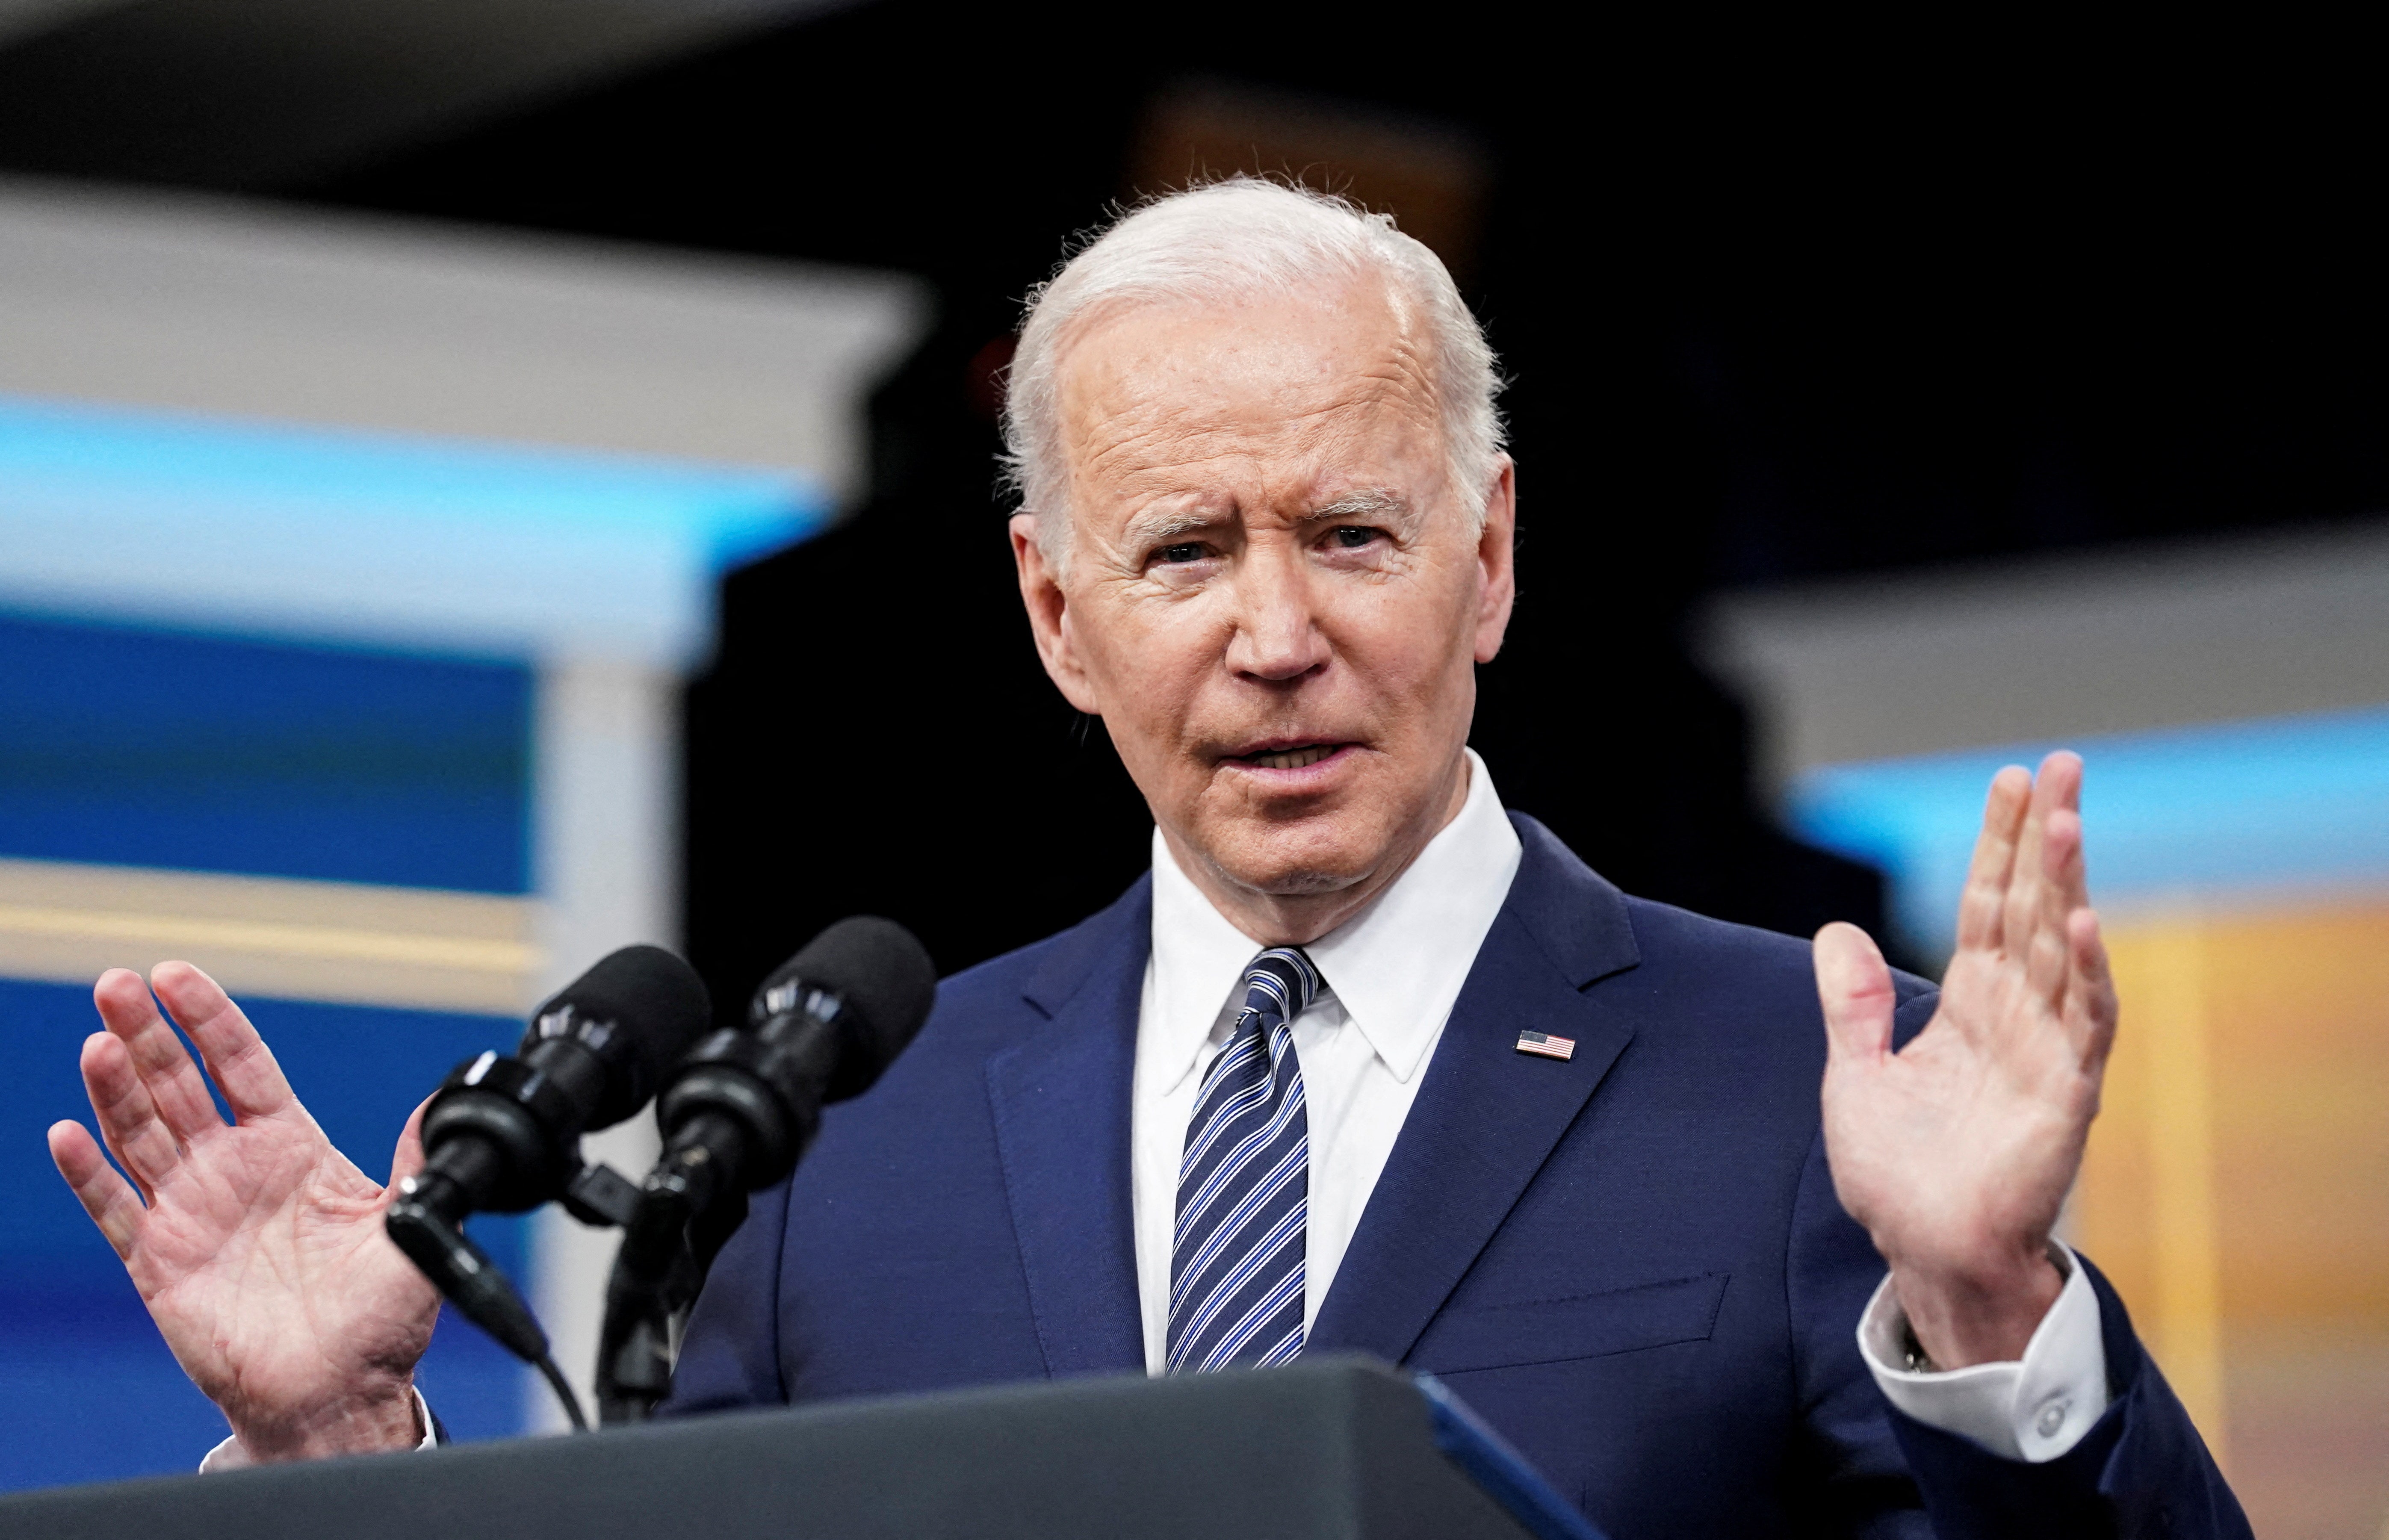 Biden slammed for 'waging war' on US industry: 'We have crises erupting across our nation,' Sen. Hagerty says thumbnail